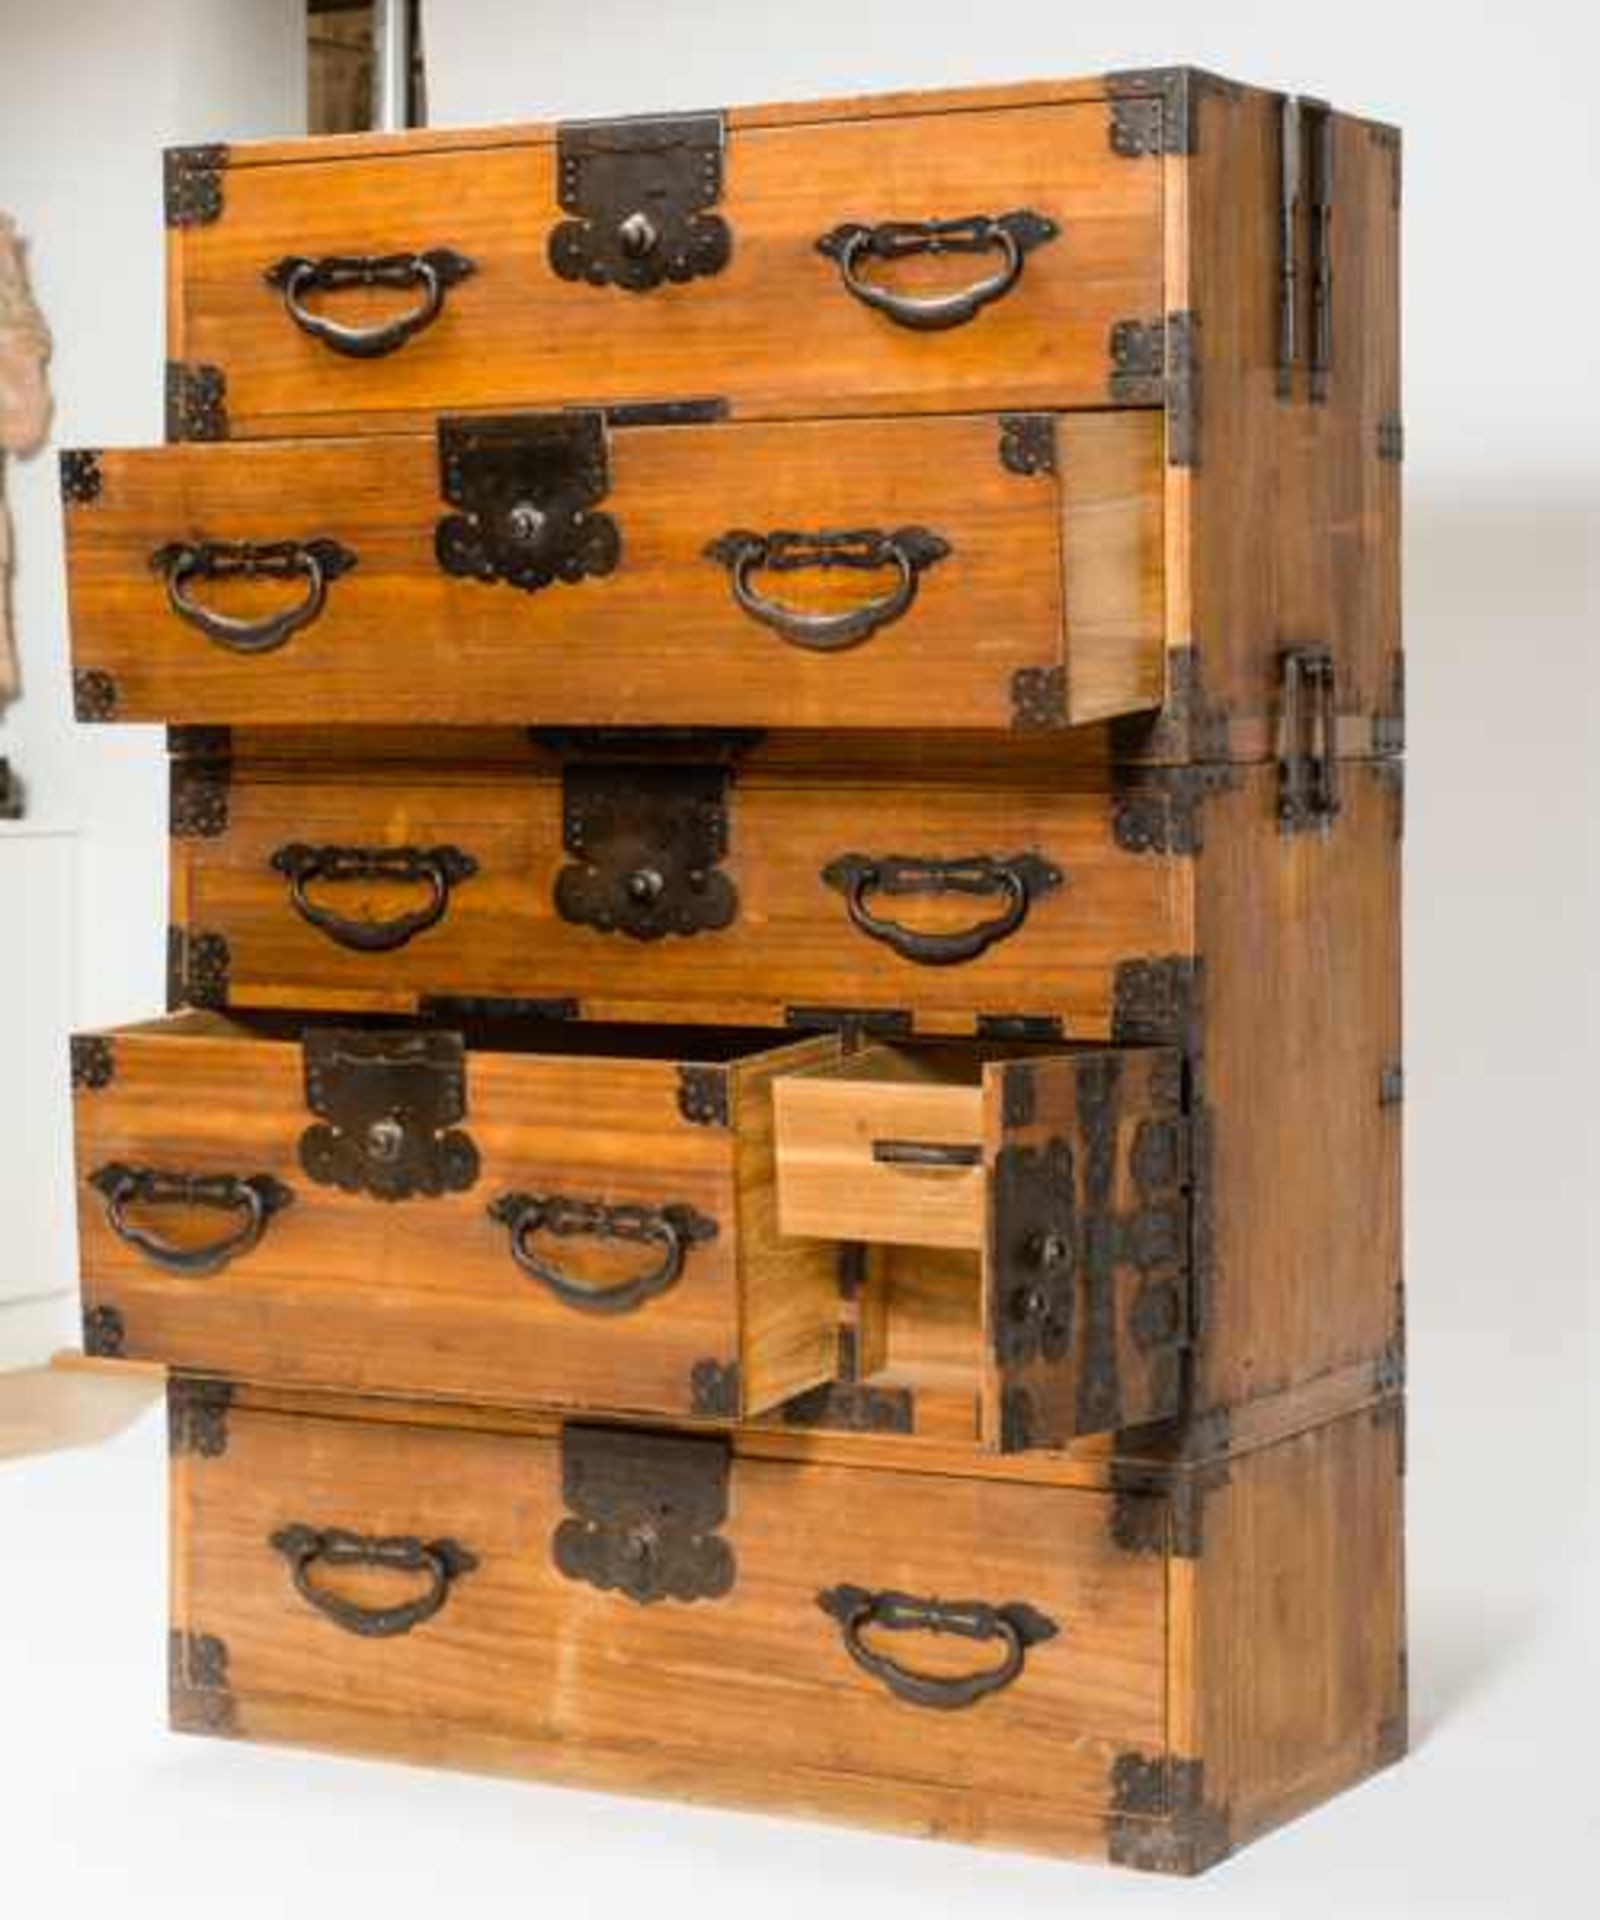 TANSU . Japan, first half of 20 cent.185, 186, 187 THREE TANSU: DRAWERED STORAGE CABINETS The - Image 4 of 5